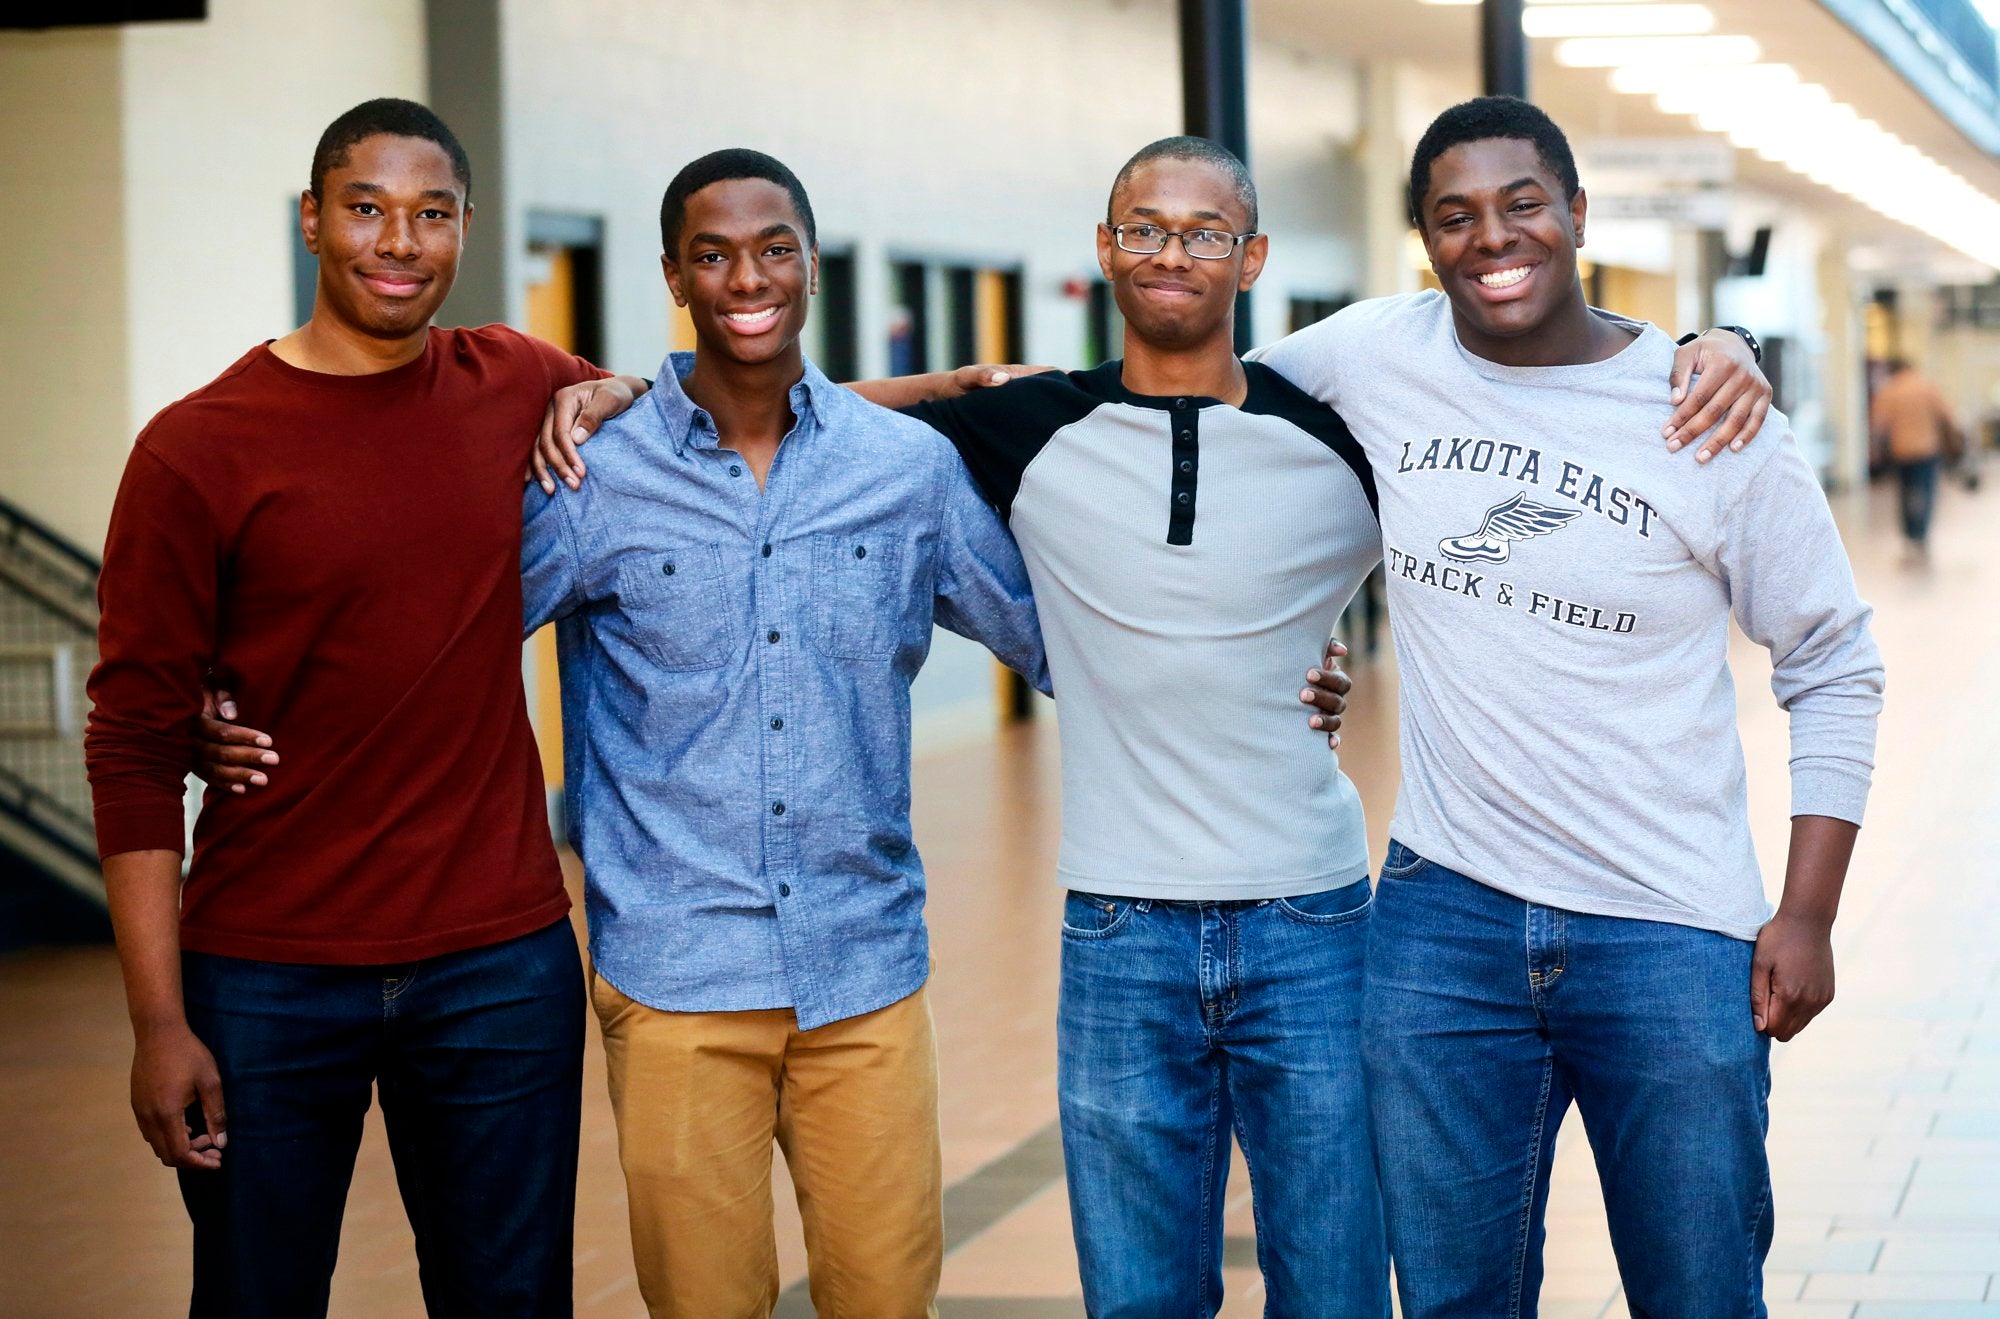 This Set Of Quadruplet Brothers Were All Accepted To Ivy League Colleges
